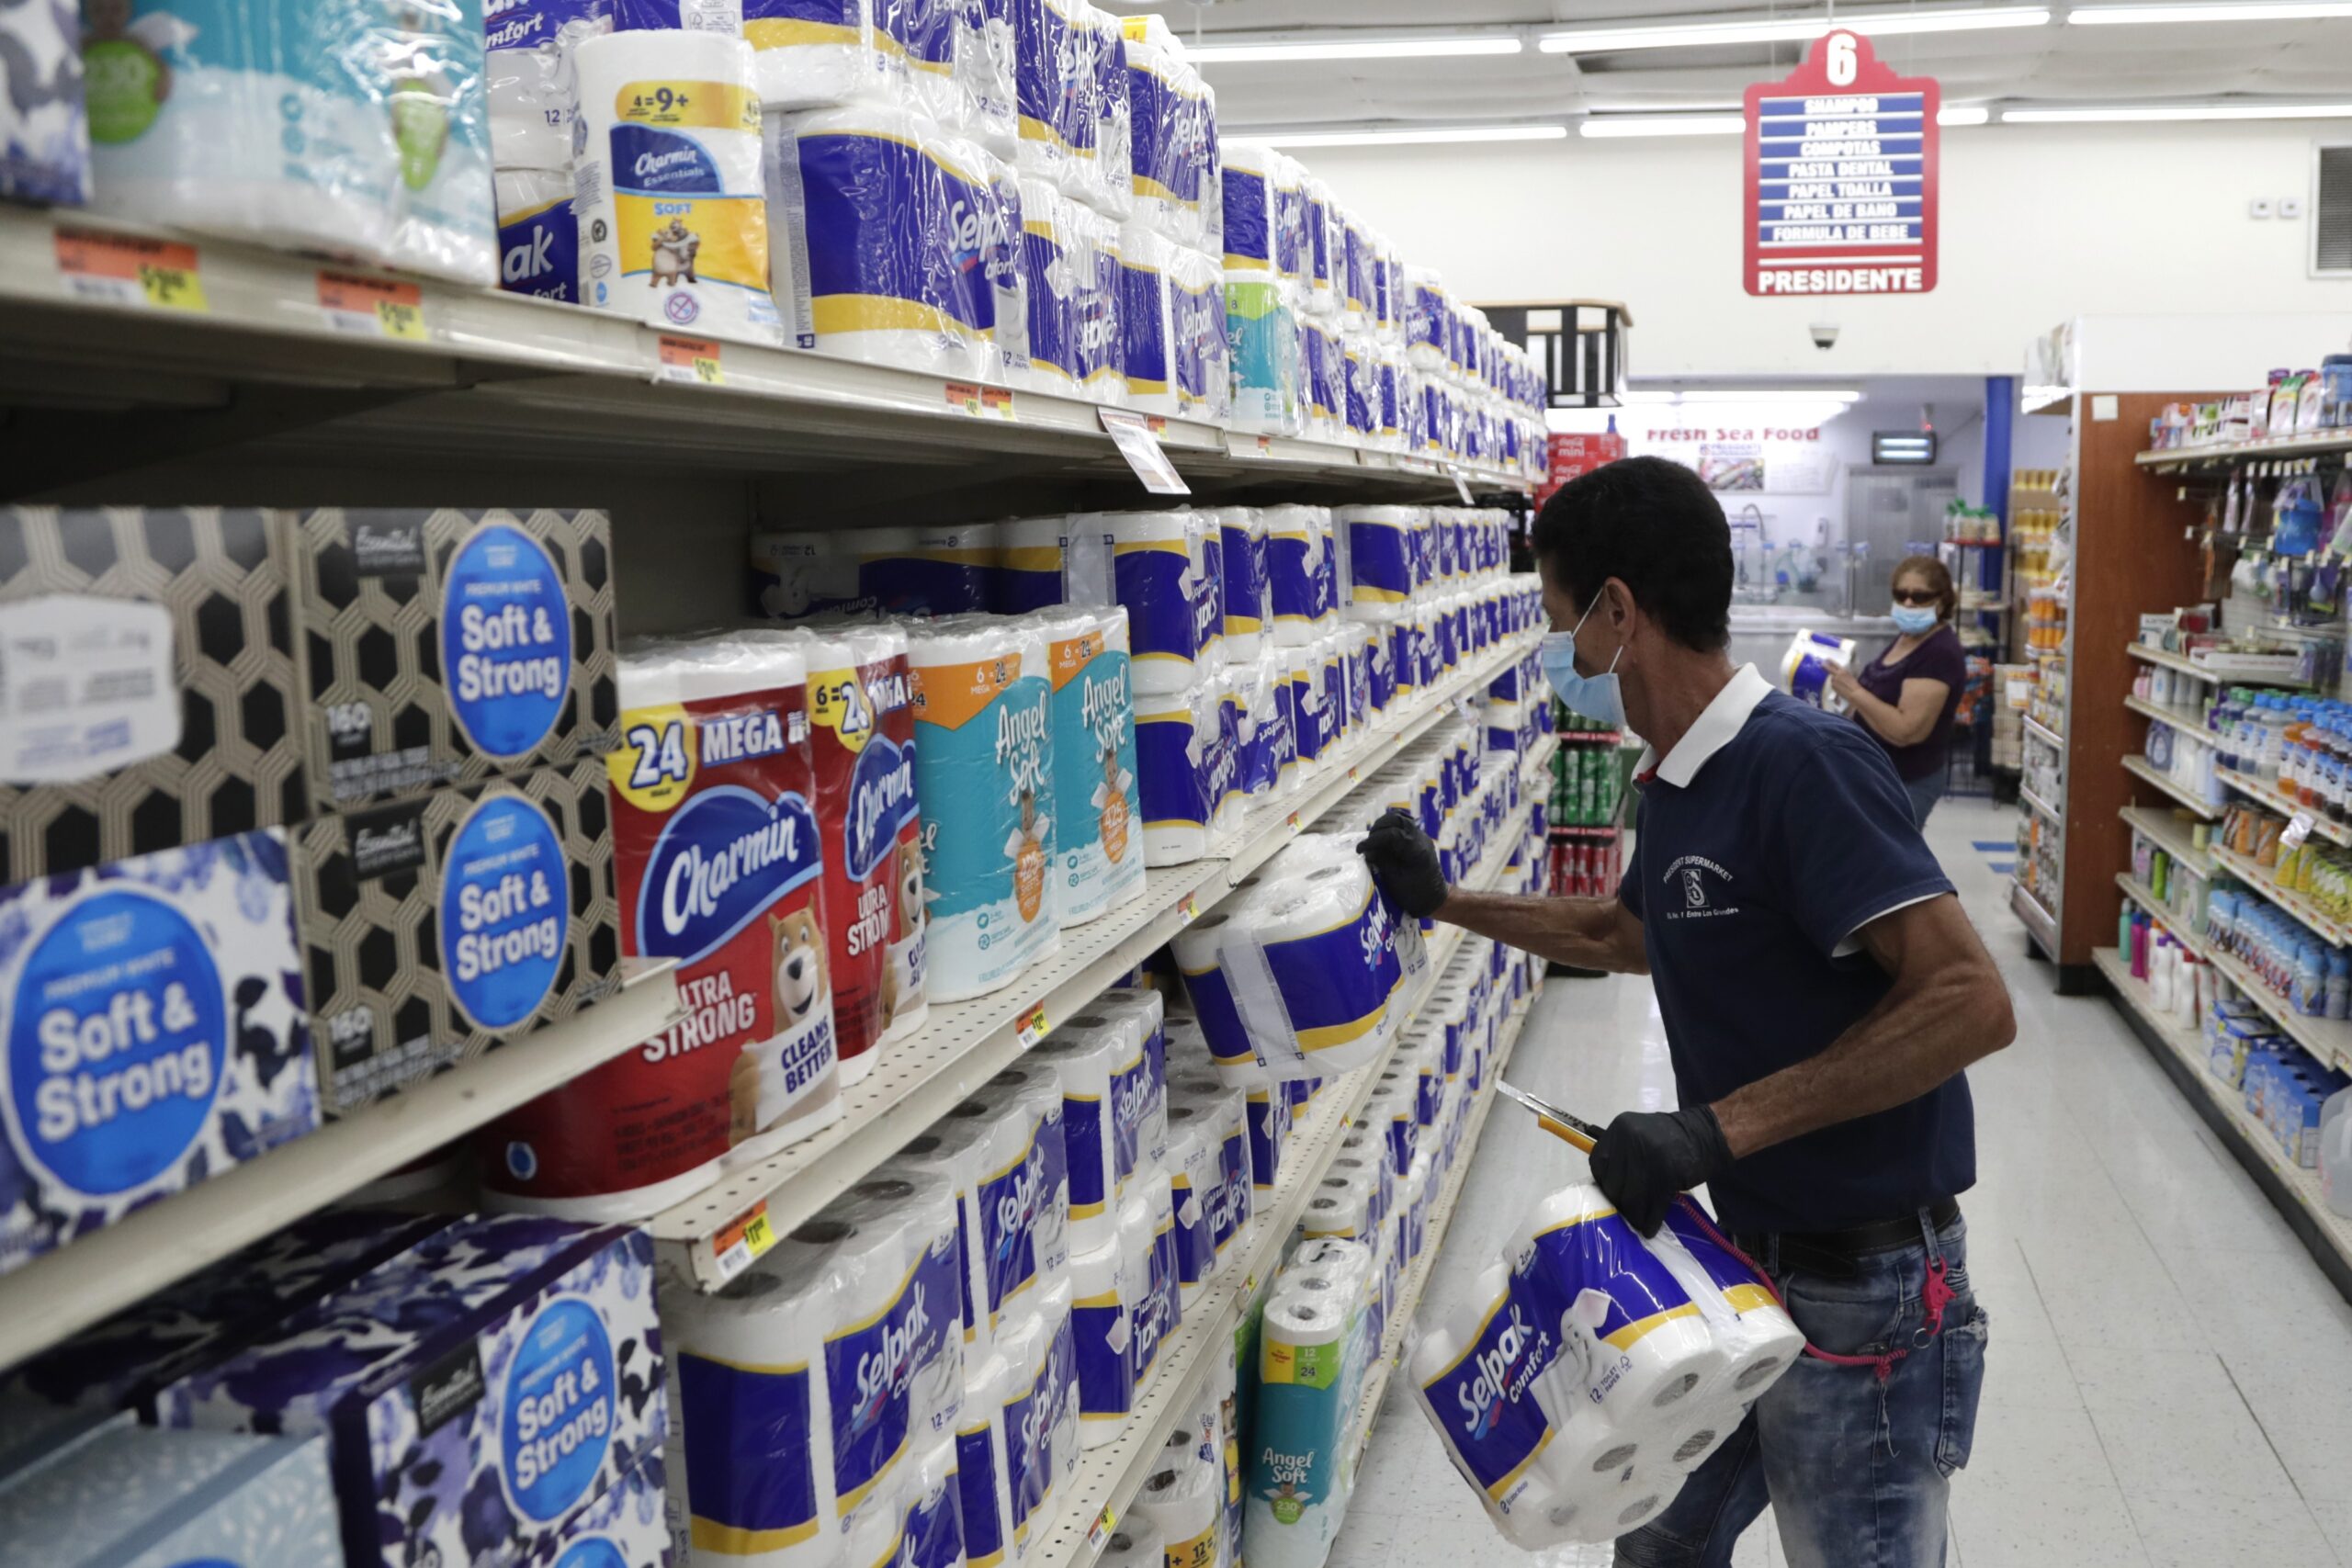 Jesus Padron wears a protective mask as he stocks shelves with toilet paper at the Presidente Supermarket